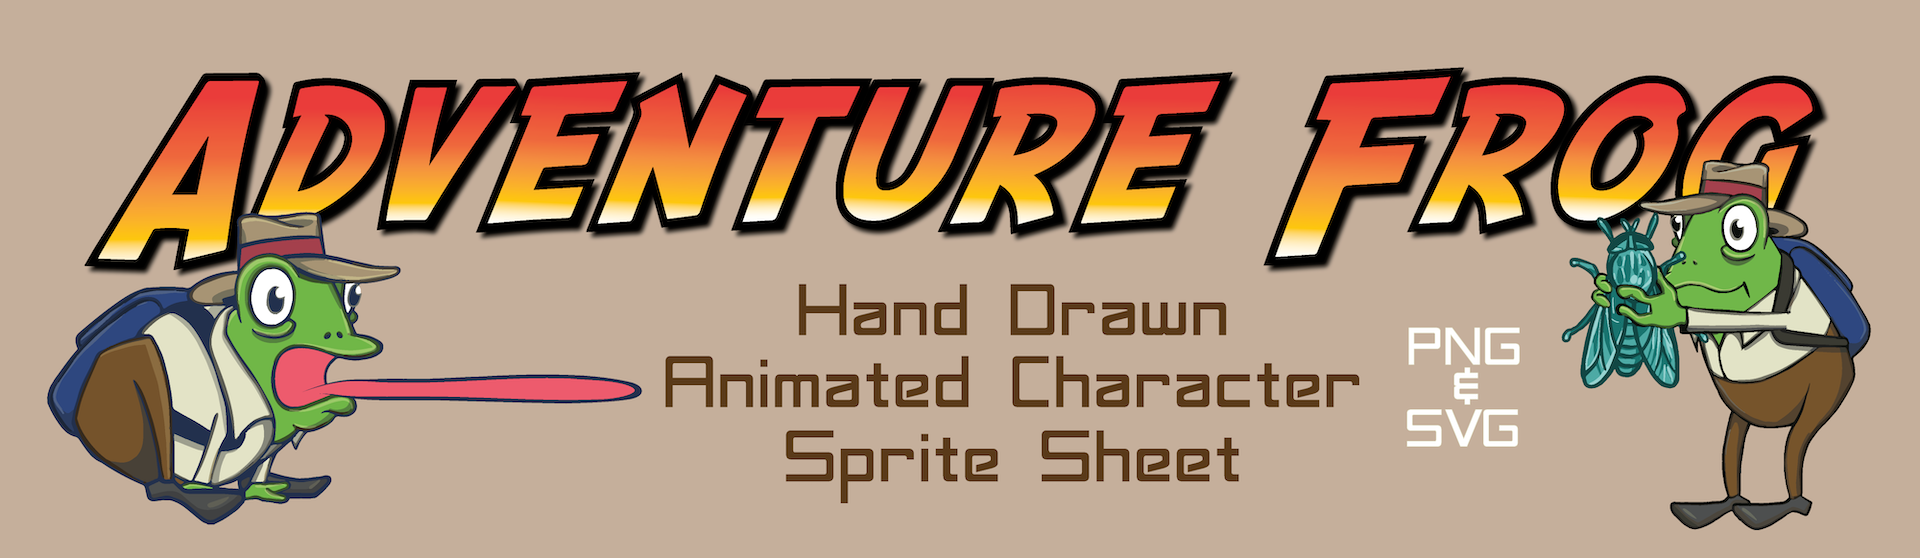 Adventure Frog - Hand Drawn Animated Character